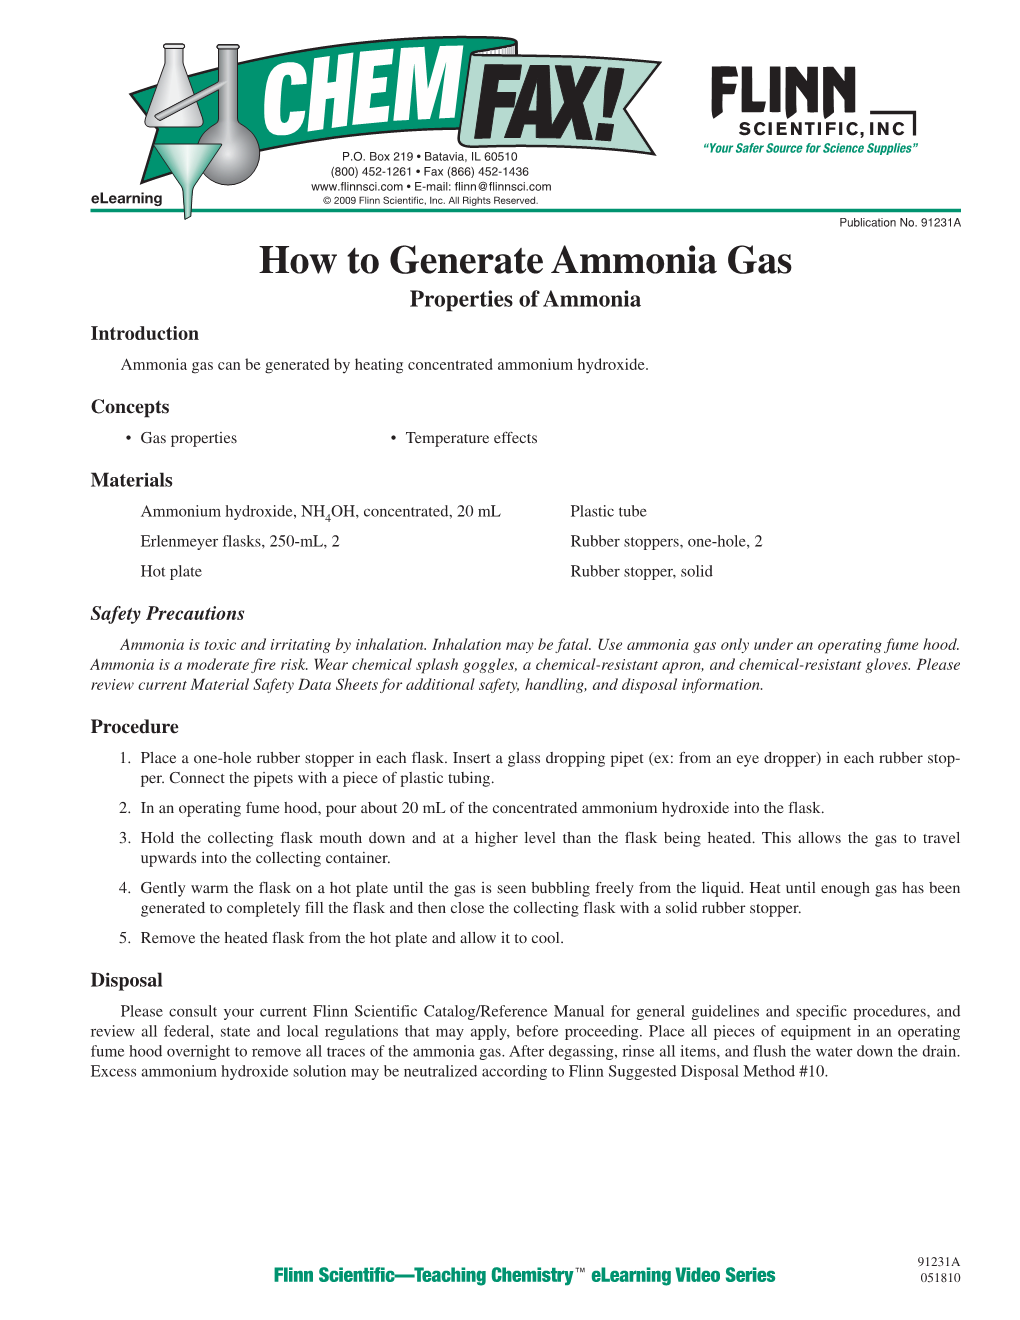 91231A How to Generate Ammonia Gas-Rev